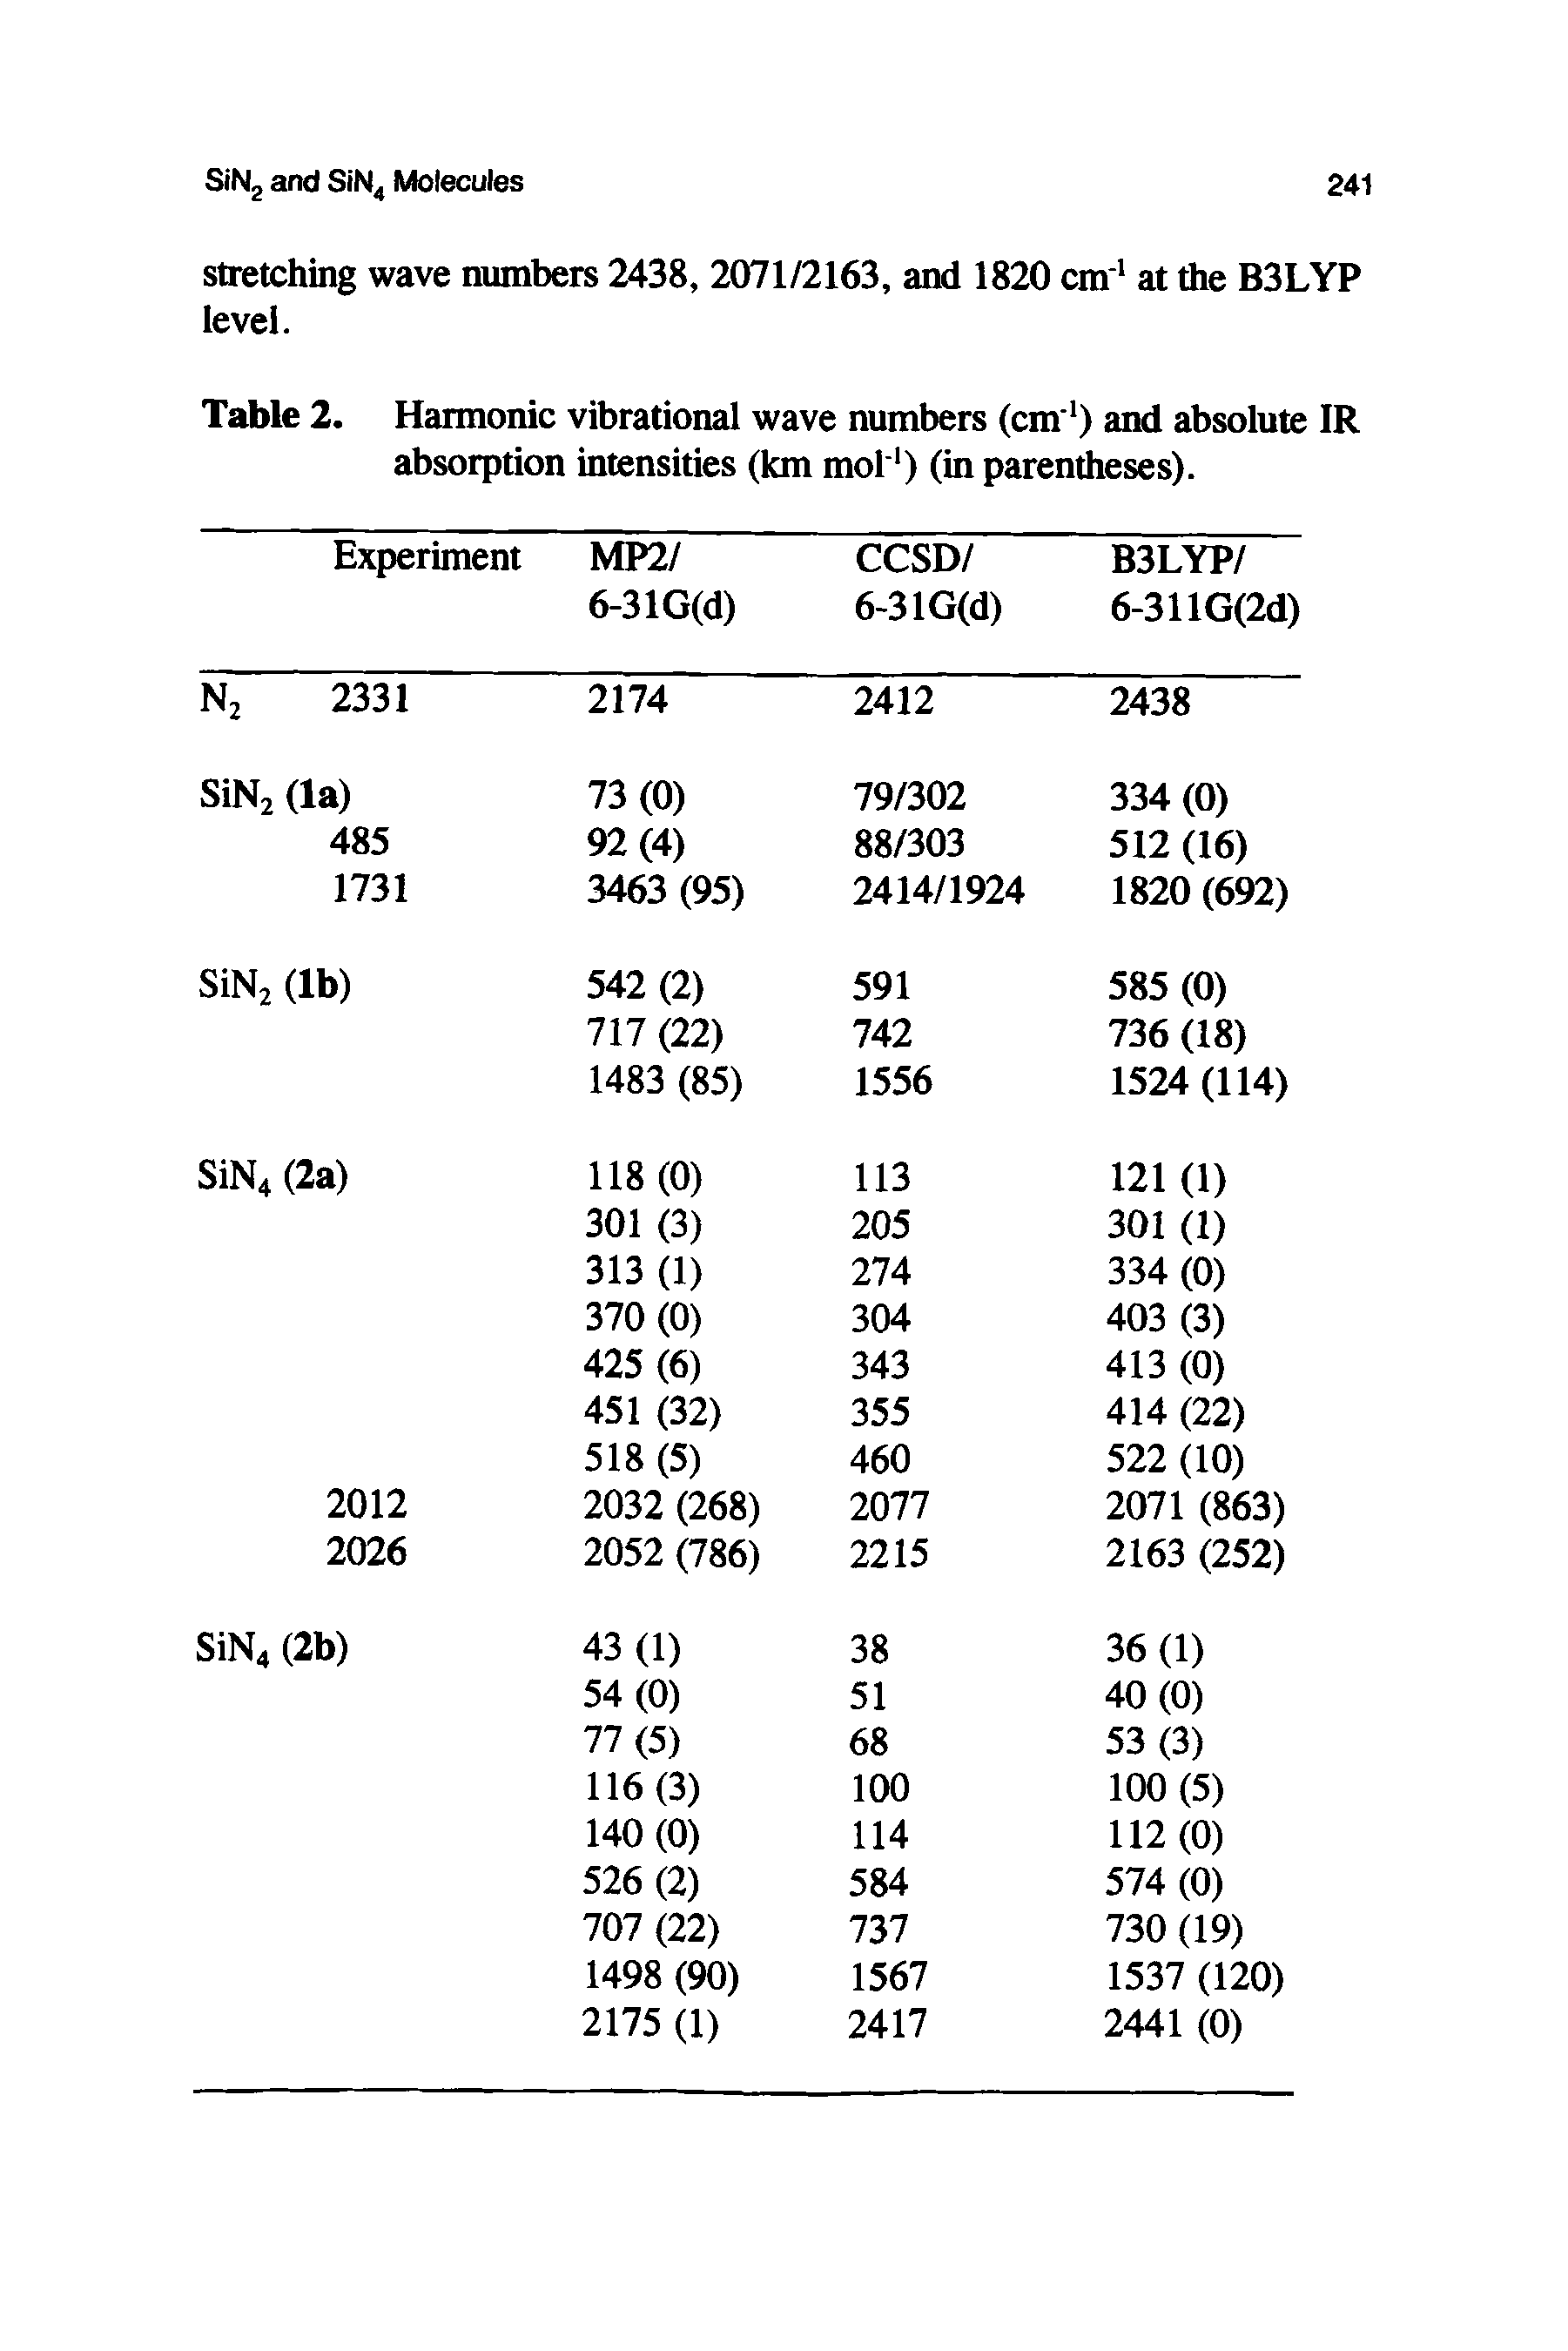 Table 2. Harmonic vibrational wave numbers (cm1) and absolute IR absorption intensities (km mol1) (in parentheses).